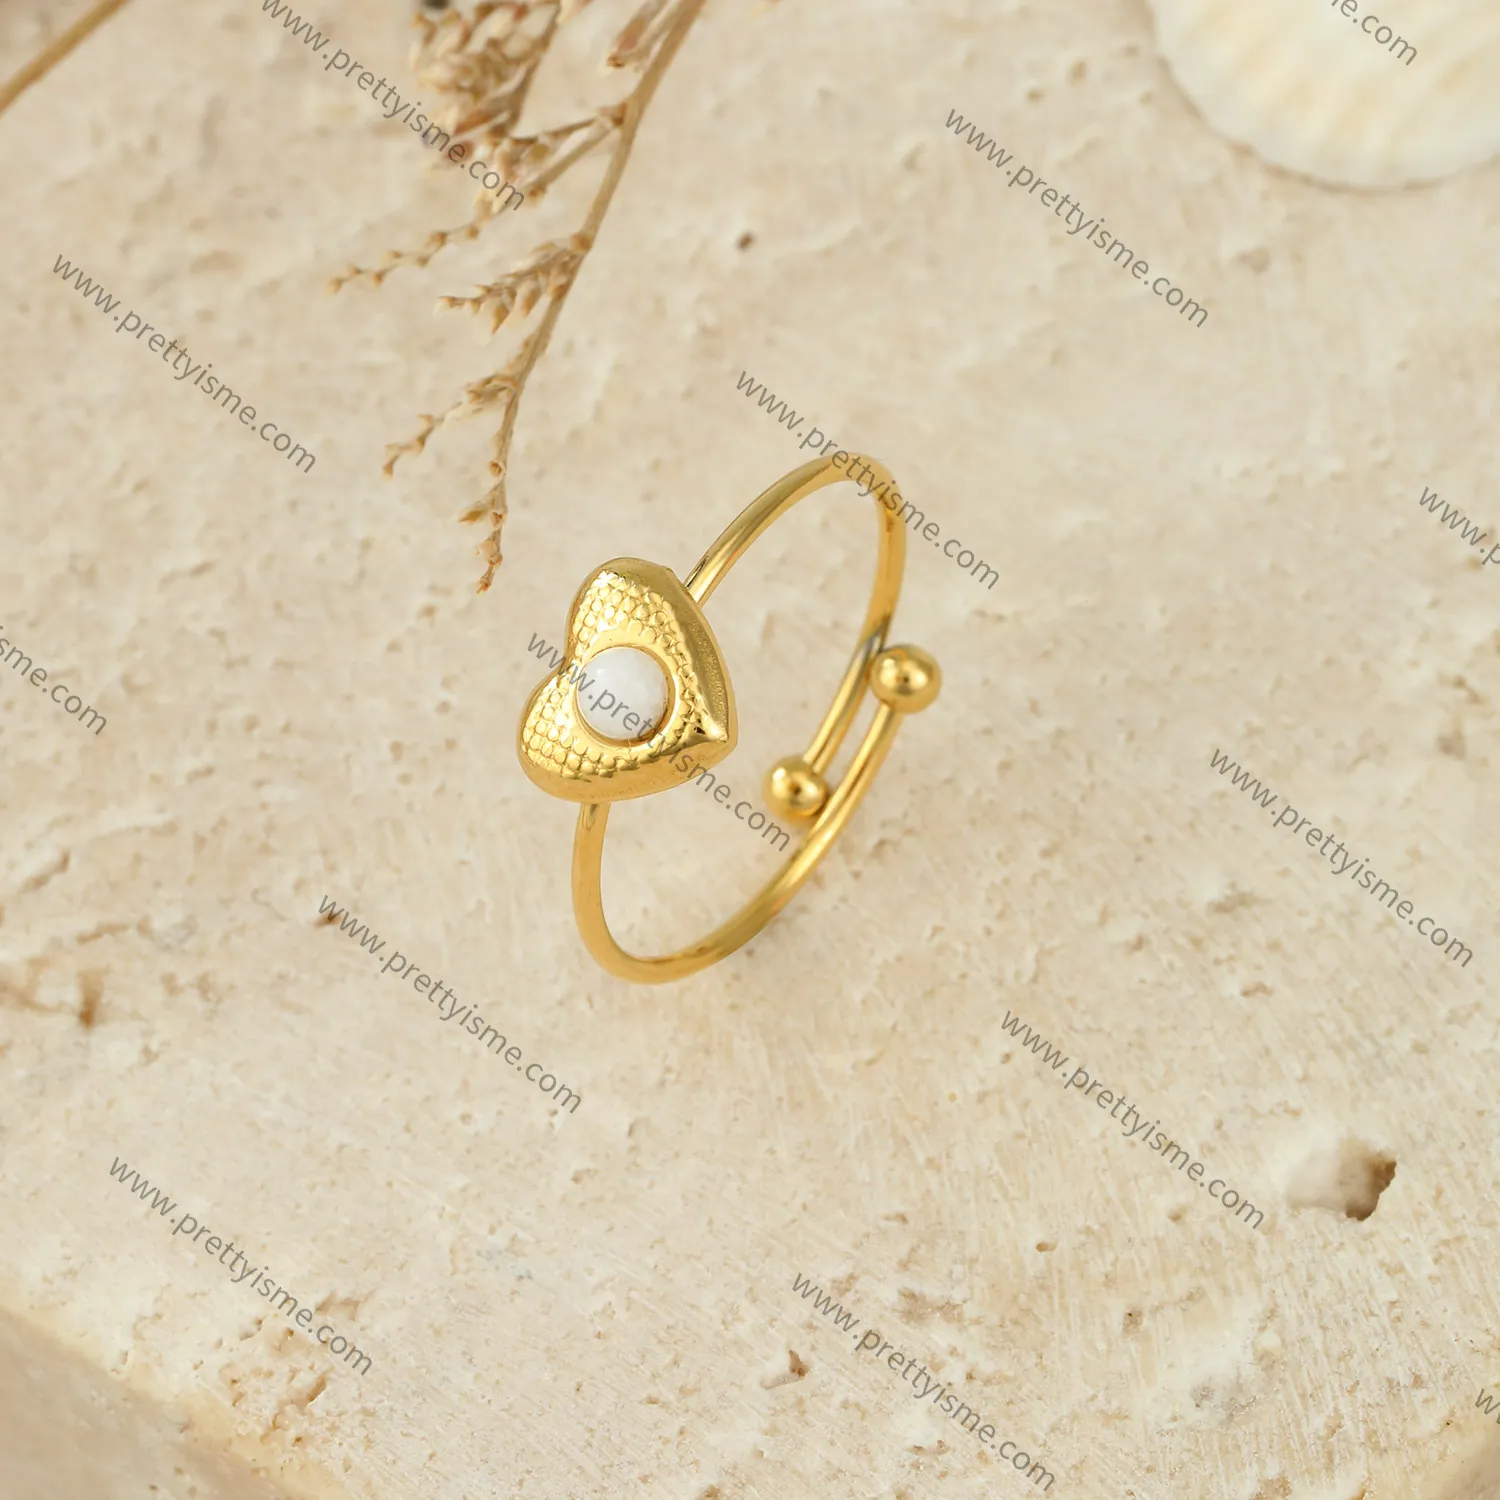 Lovely Stainless Steel Heart Ring in 18k Gold Plated Set with White Stones Open Ring (3).webp